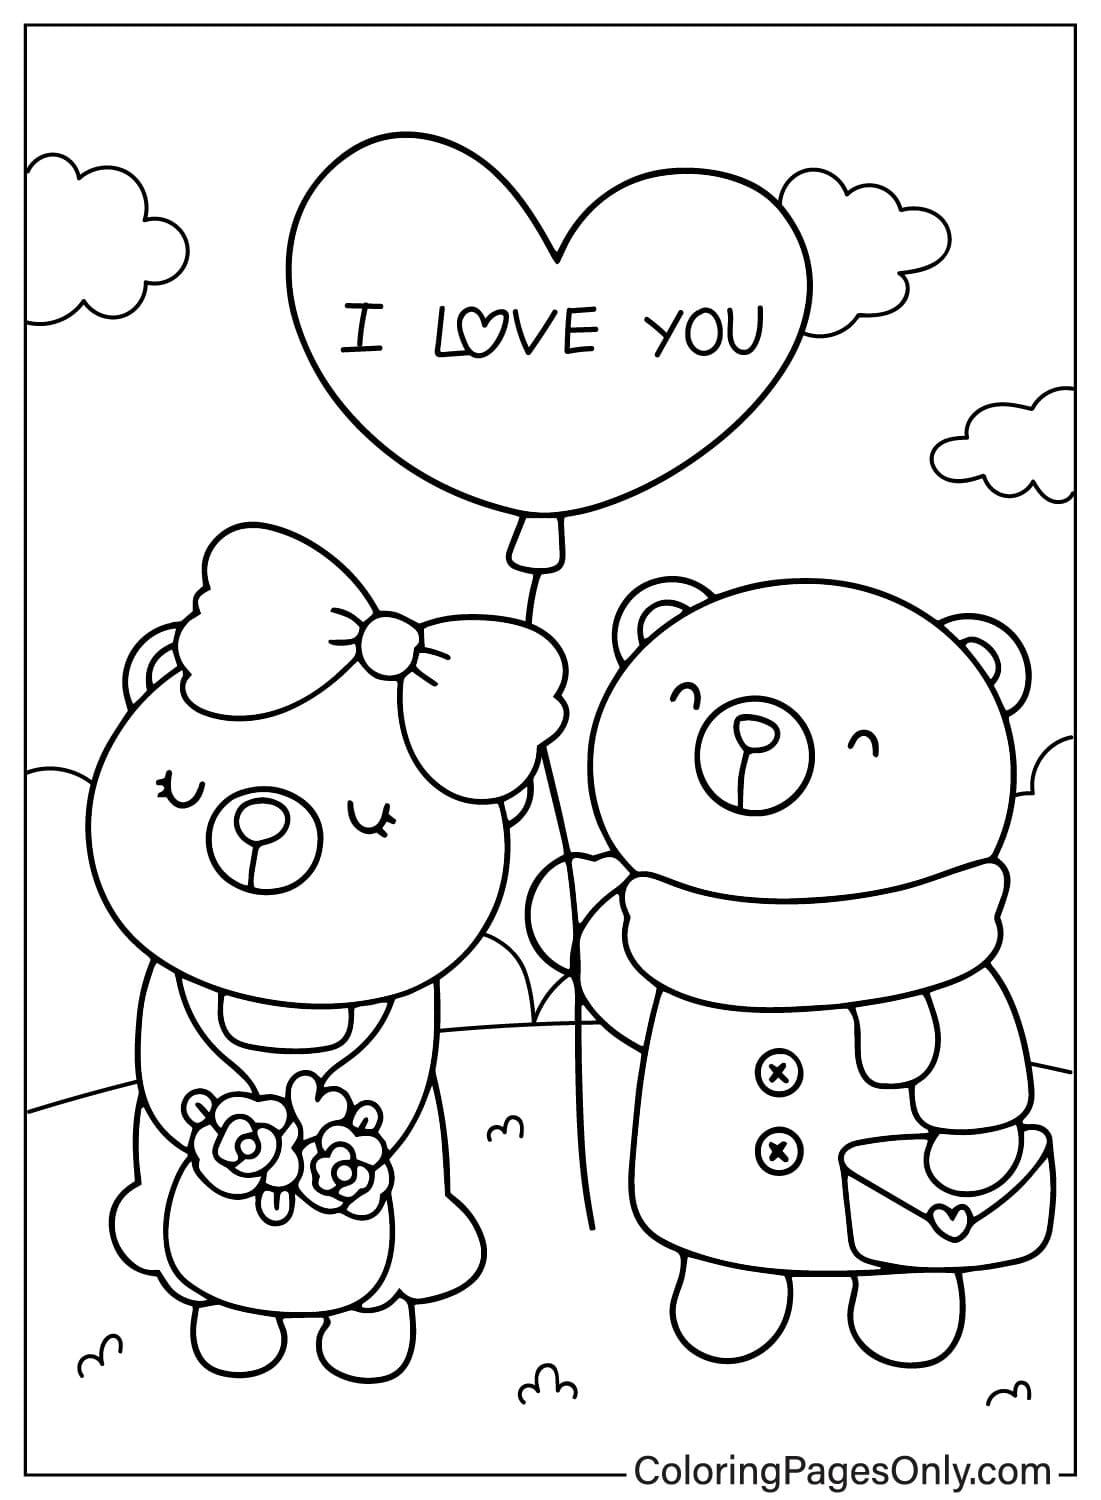 Bear Valentines Day Coloring Page from Valentine's Day